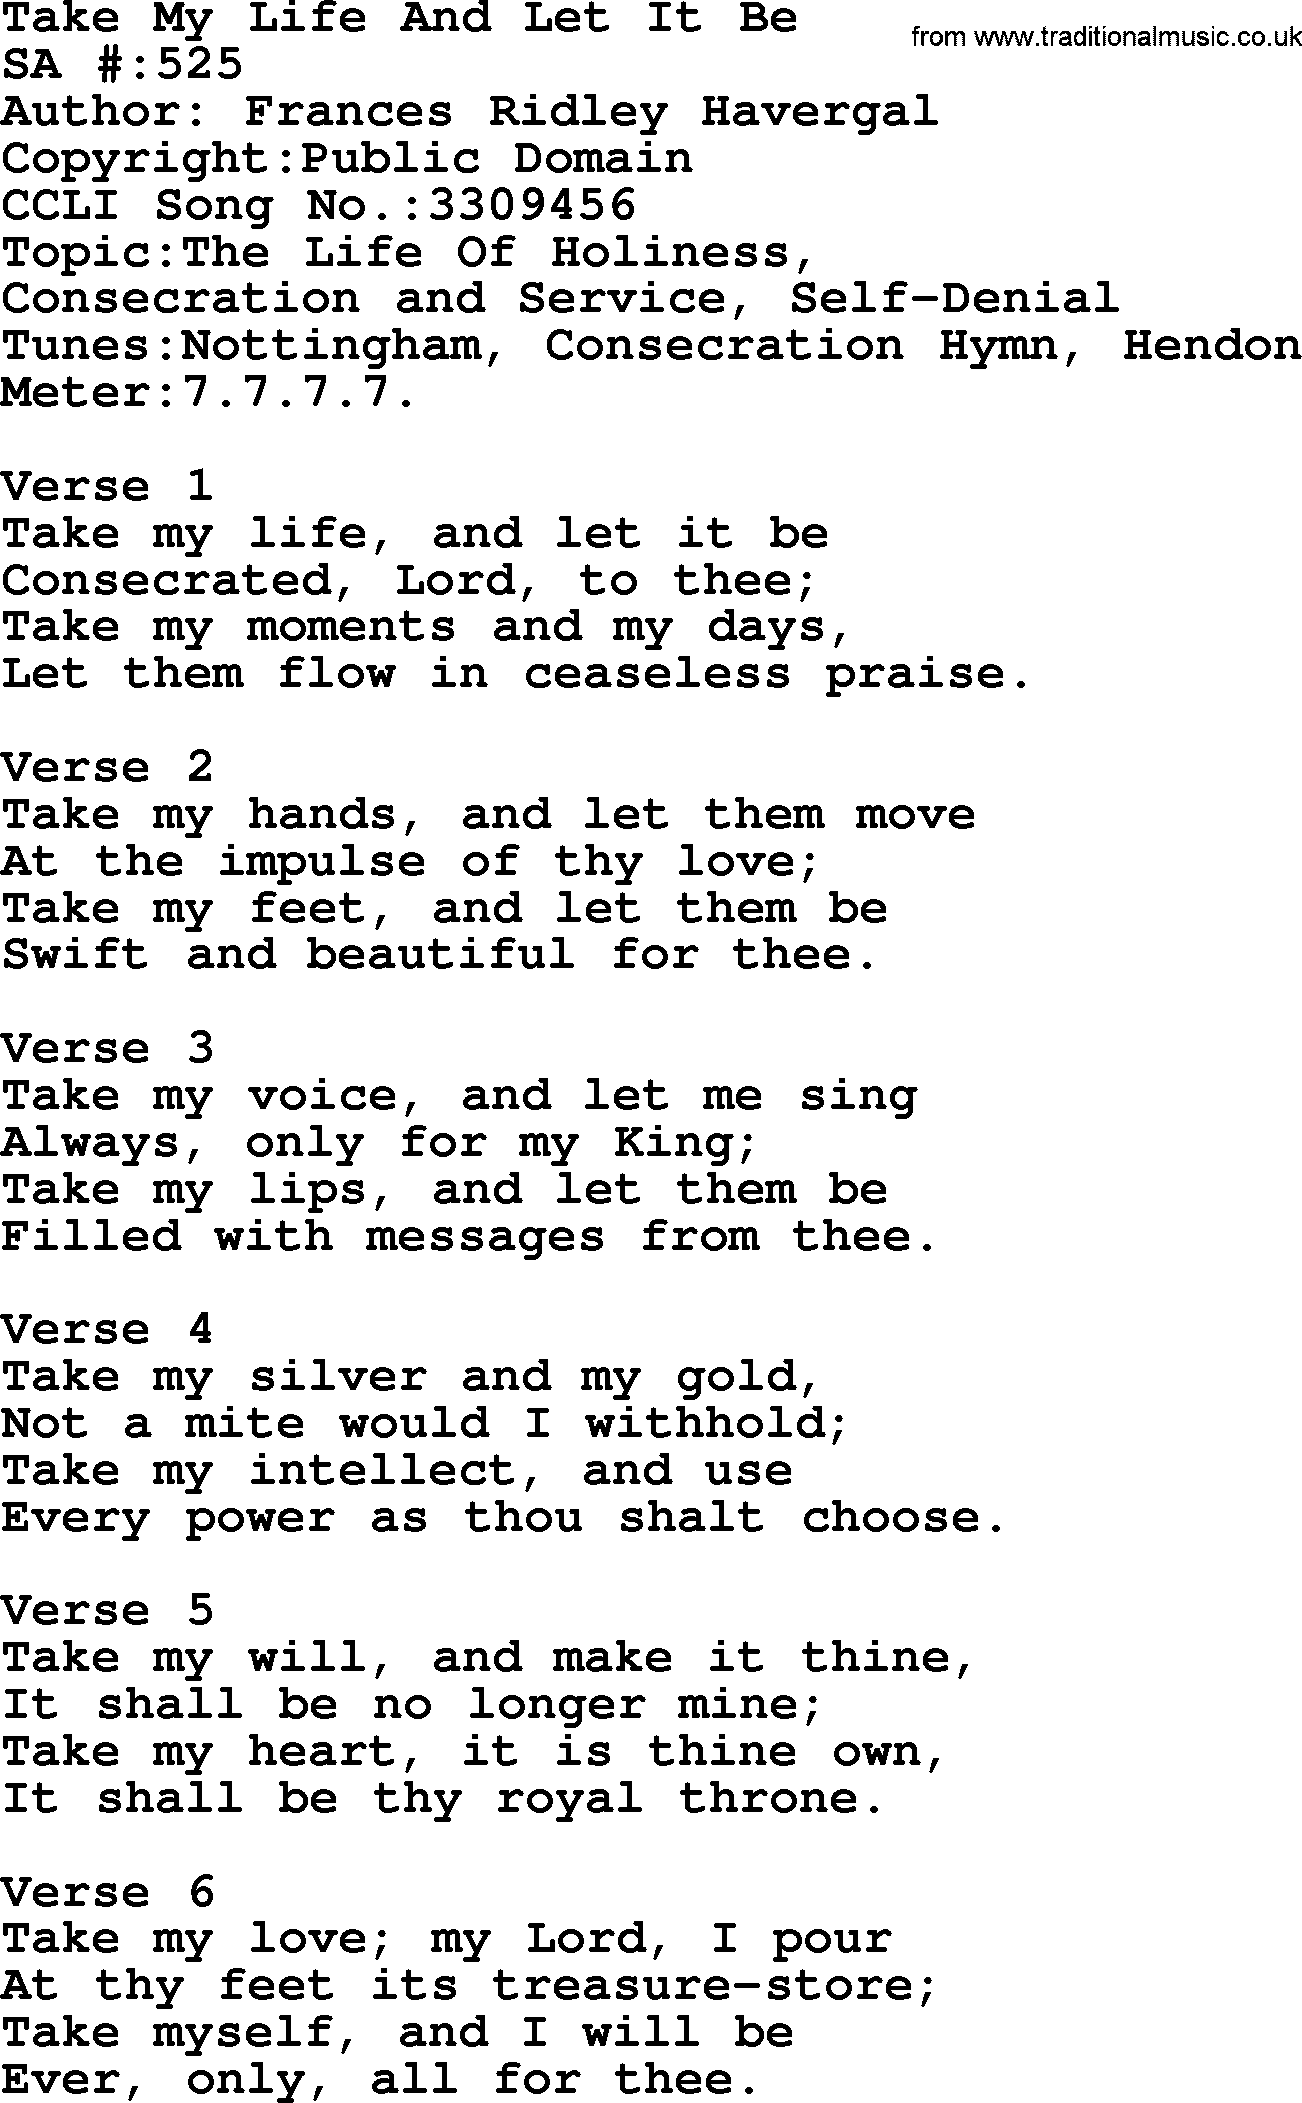 Salvation Army Hymnal, title: Take My Life And Let It Be, with lyrics and PDF,